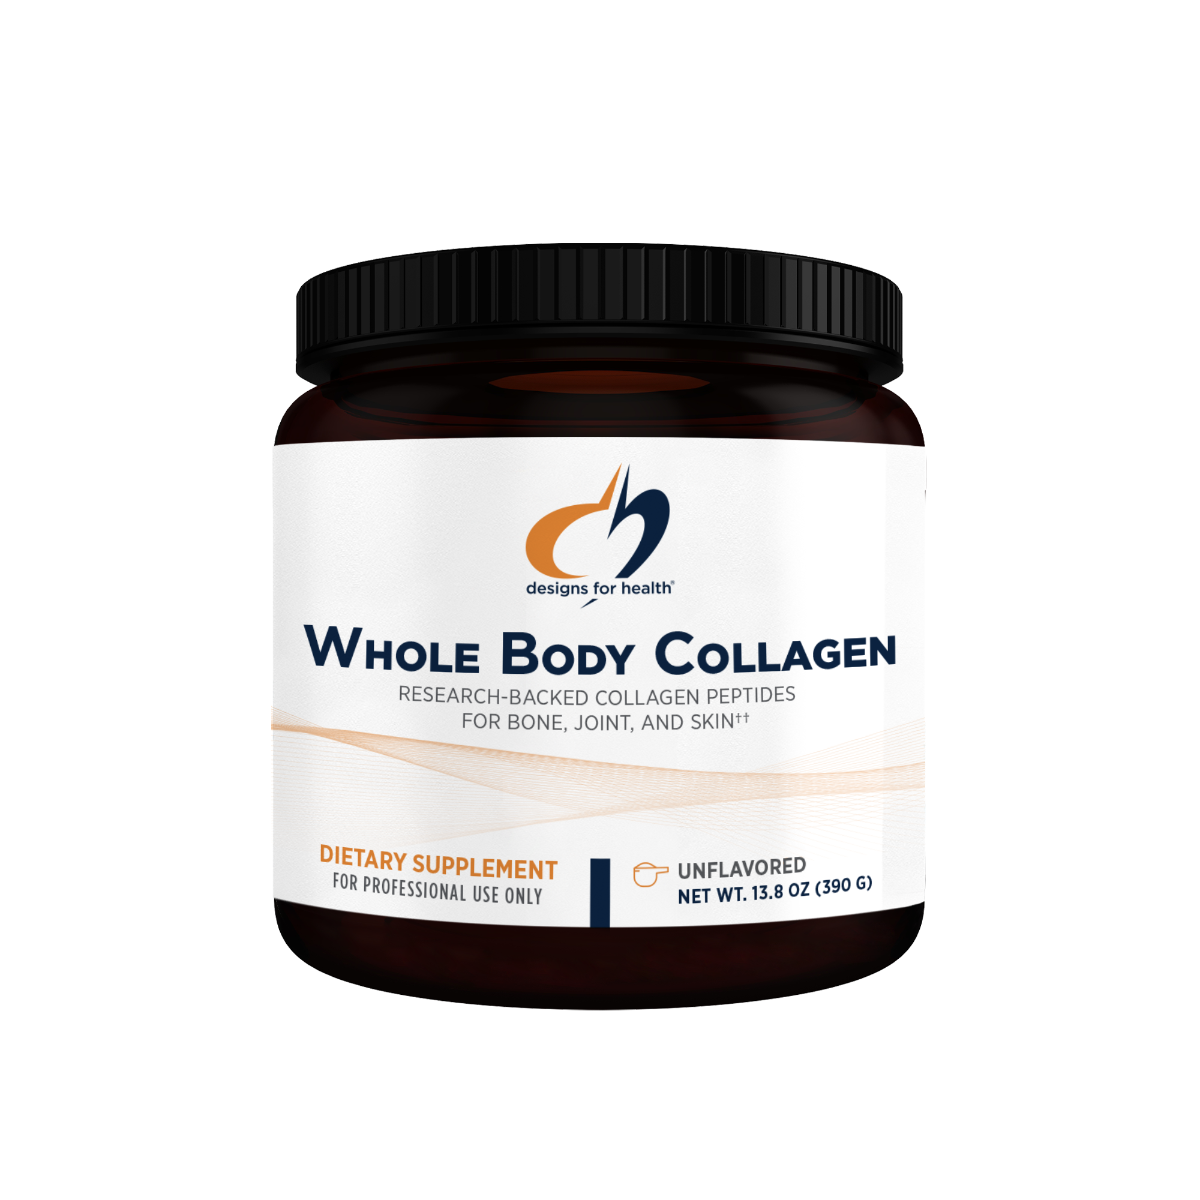 Whole Body Collagen